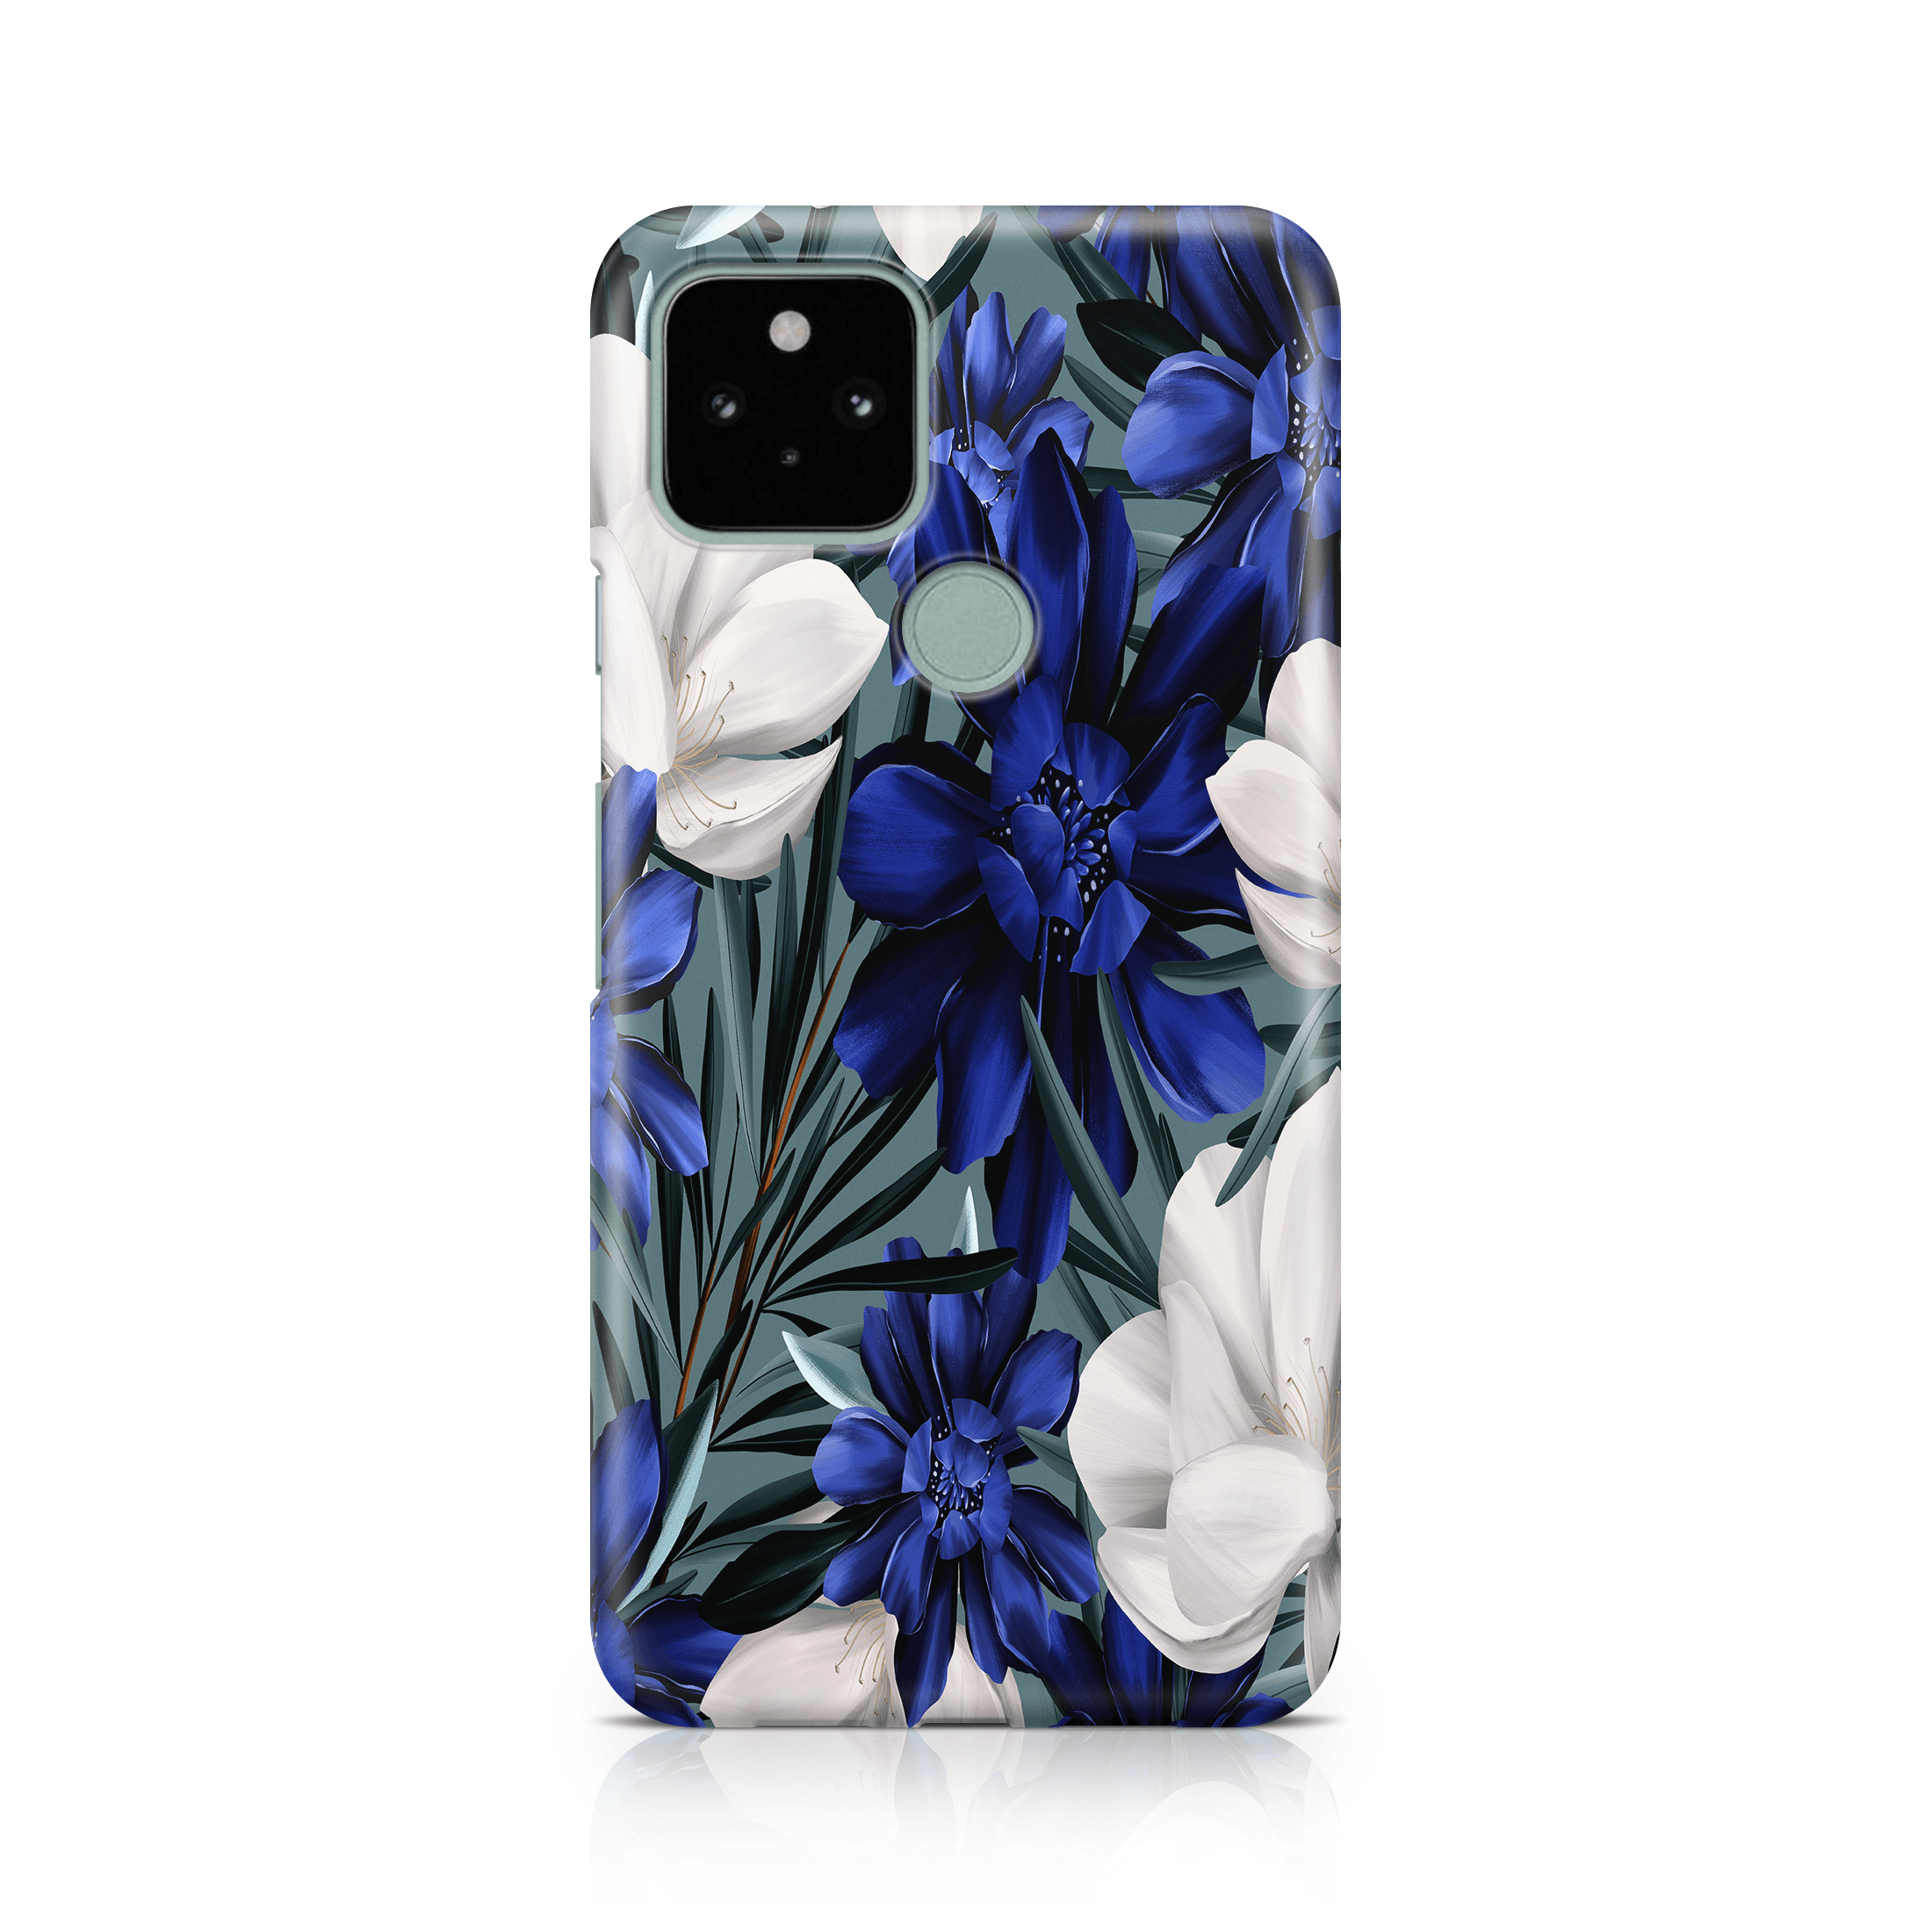 Blue Floral - Google phone case designs by CaseSwagger